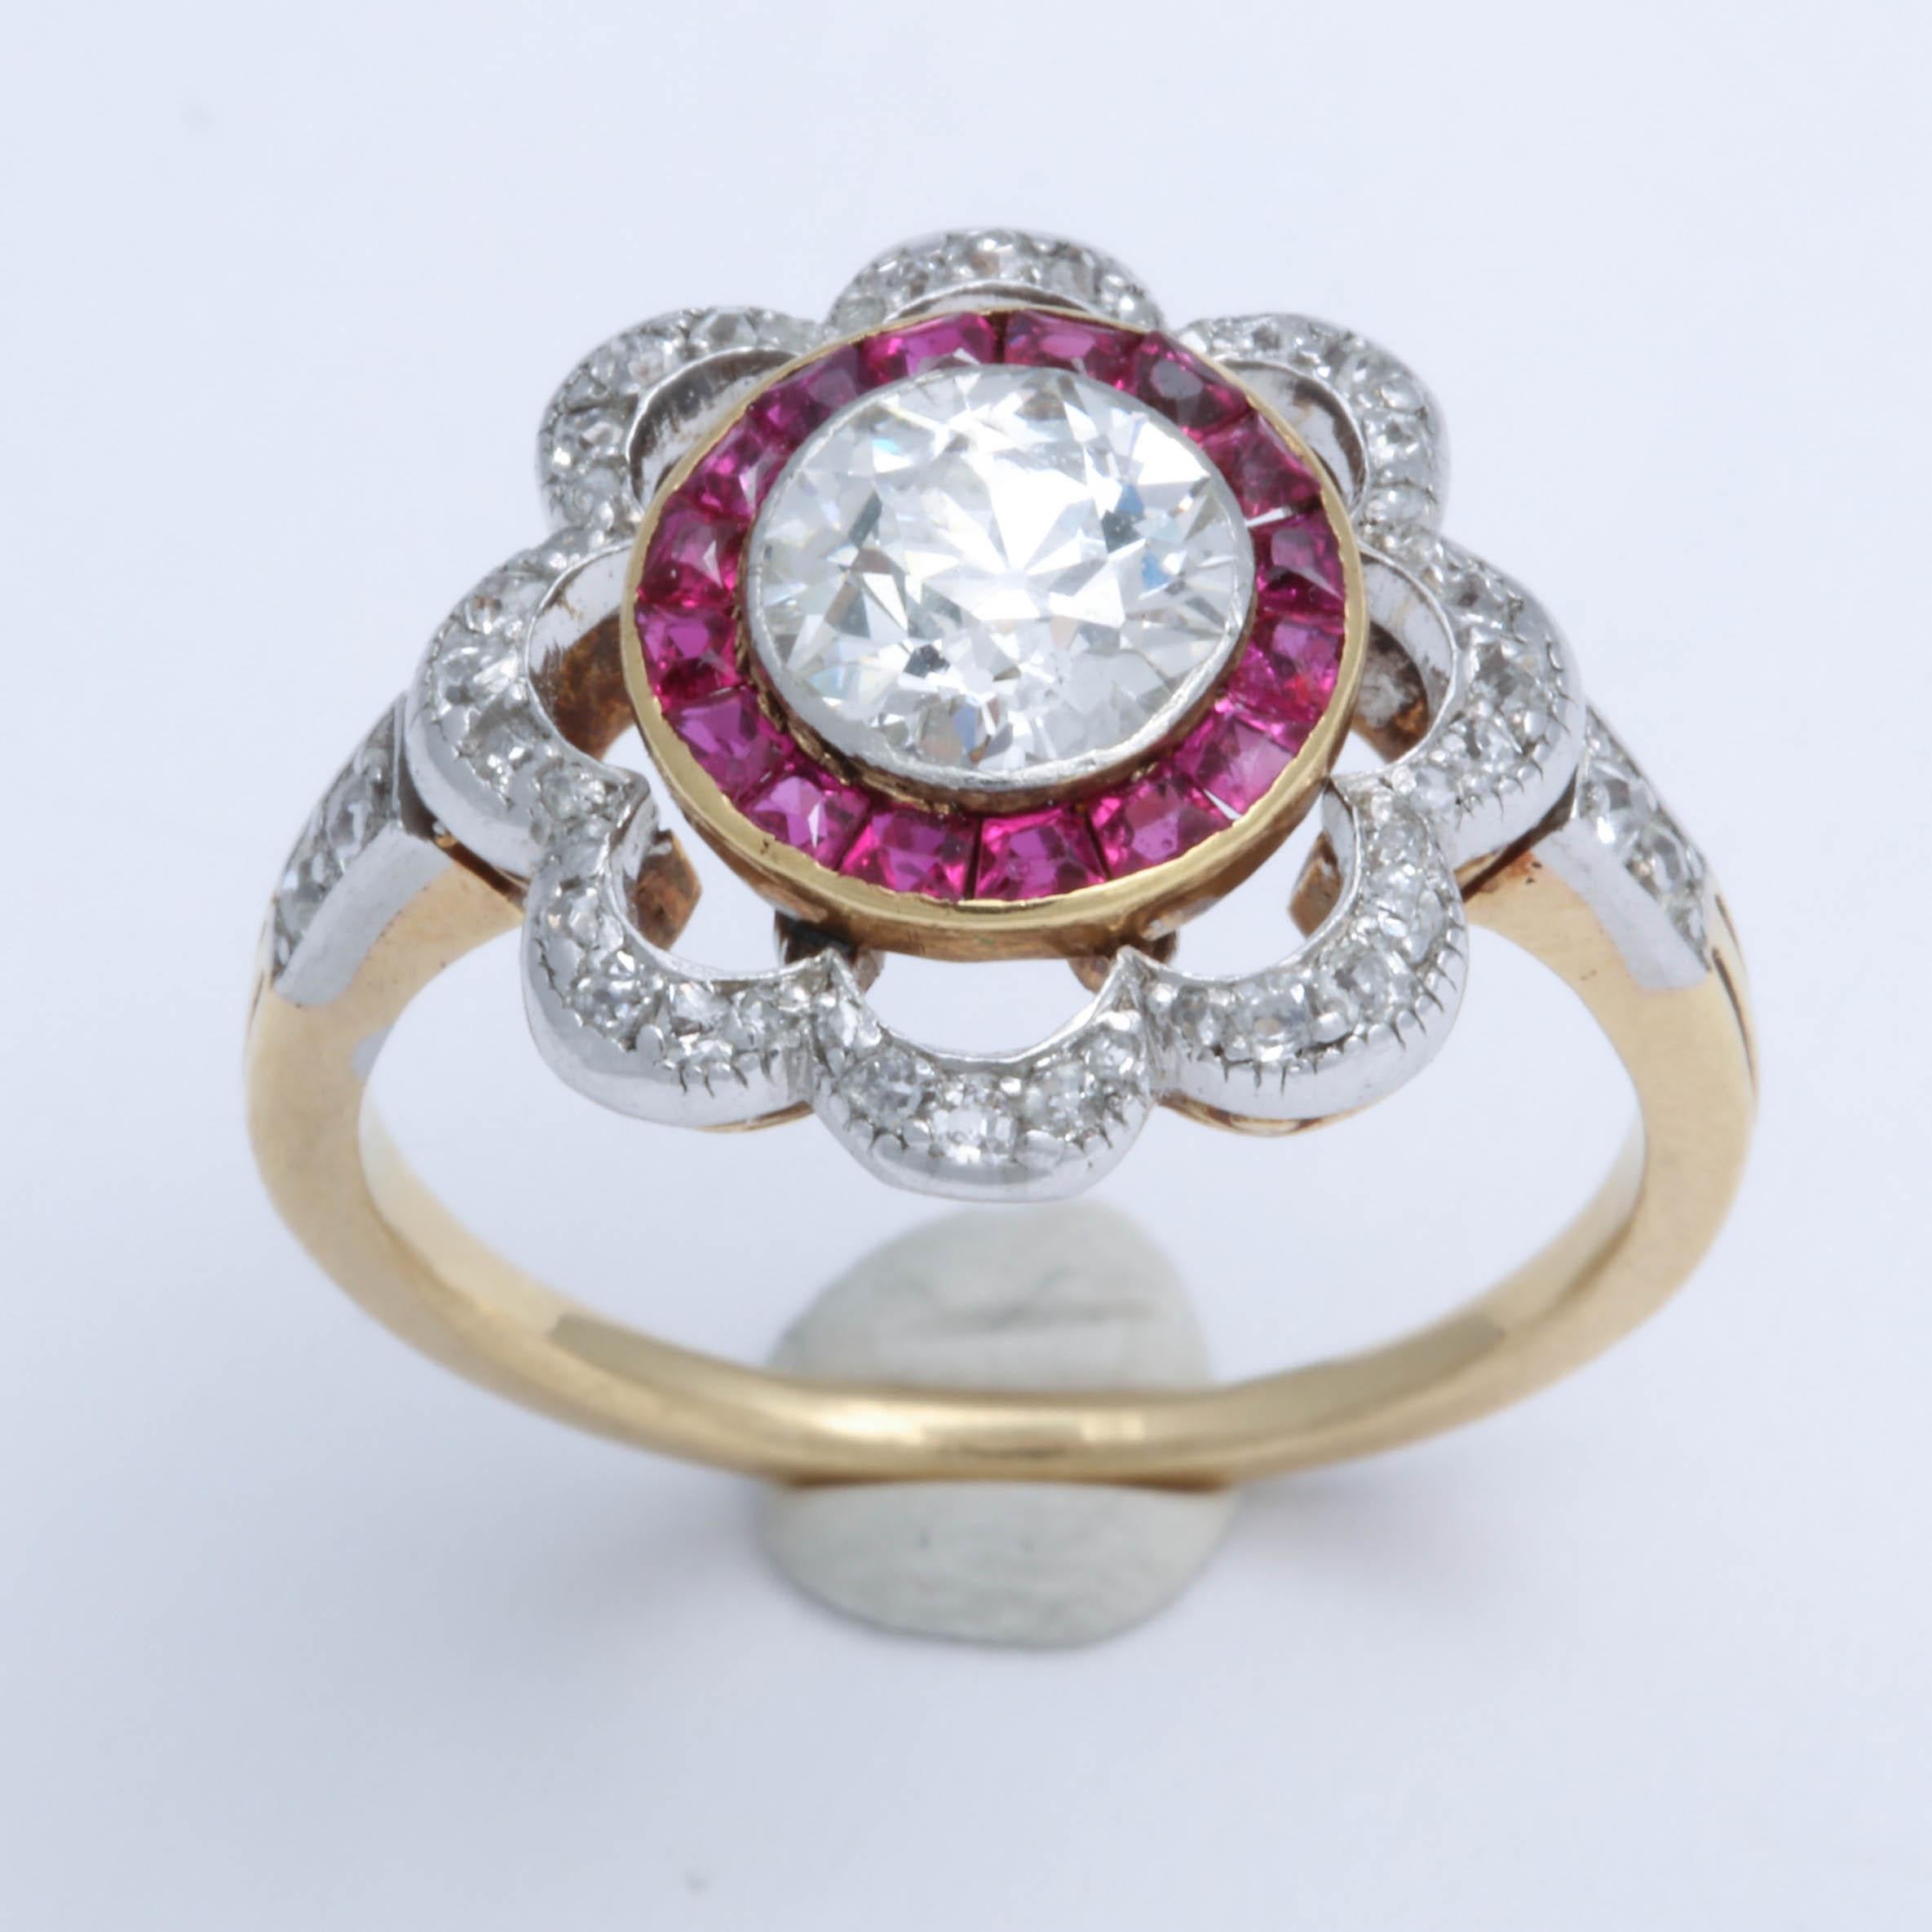 Belle Époque Turn of the Century Diamond and Ruby Ring